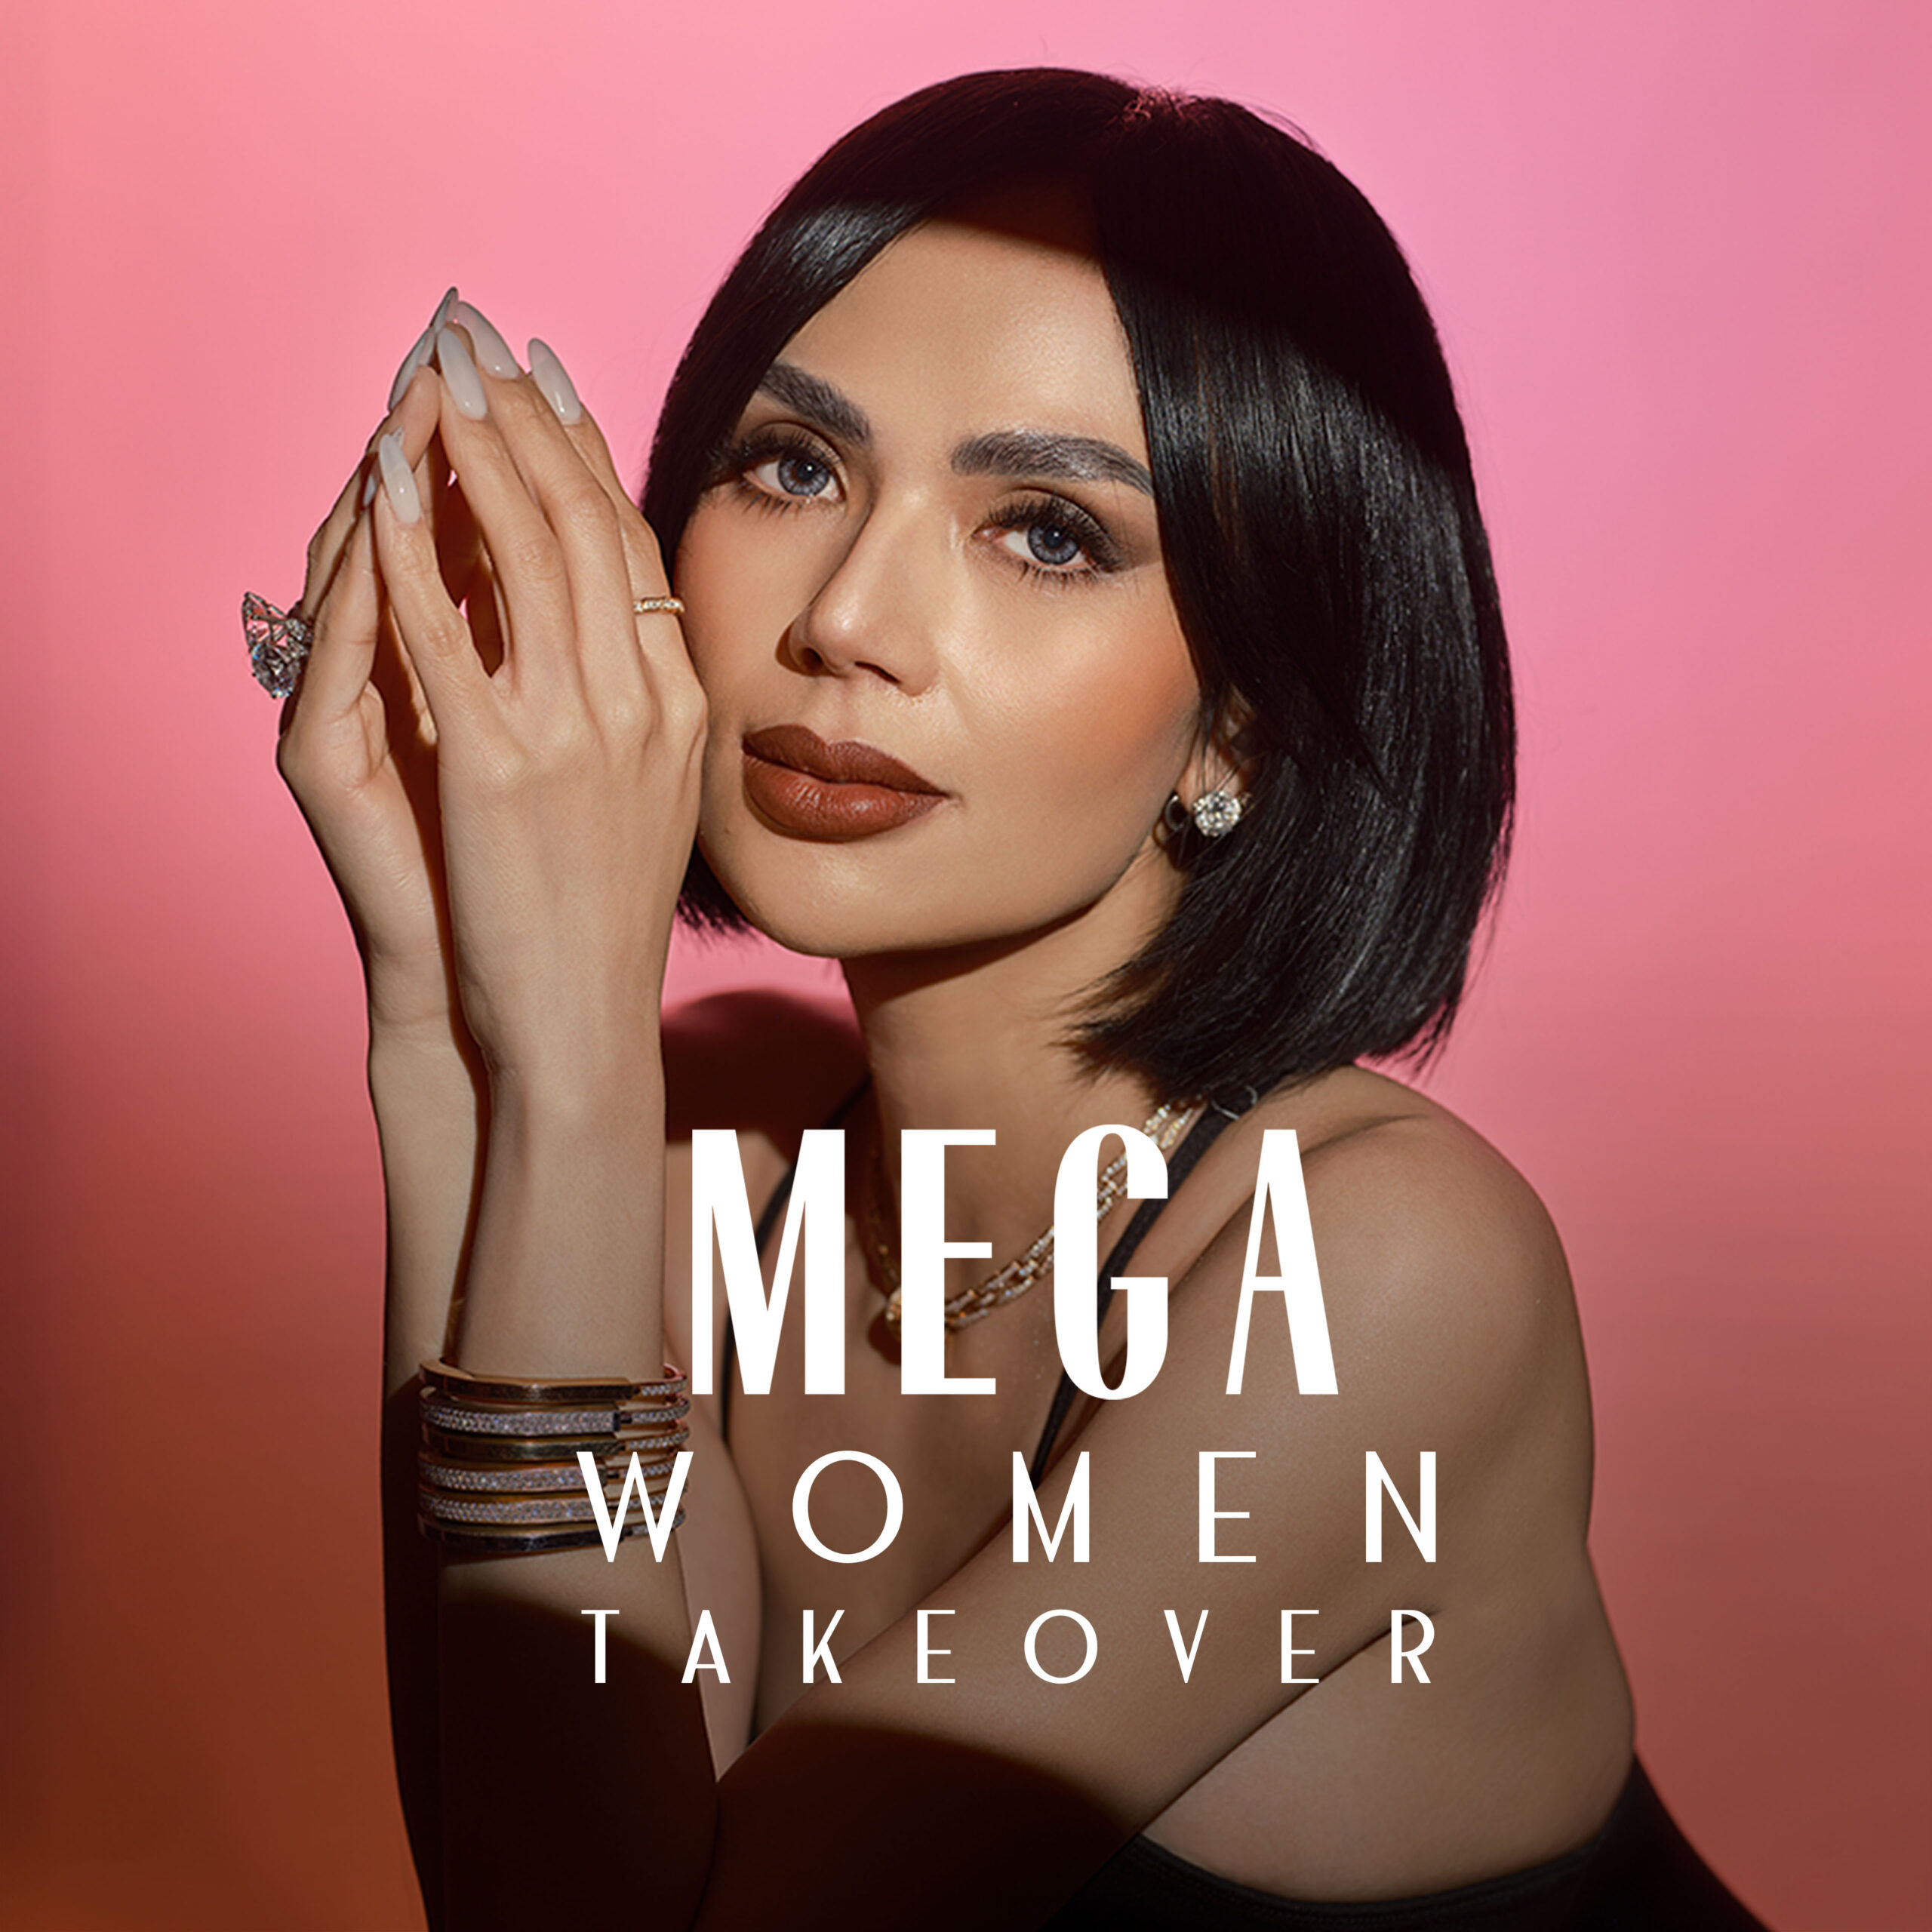 MEGA Women Takeover: Rosenda Casaje is Creating a Community of Women with Skin Confidence